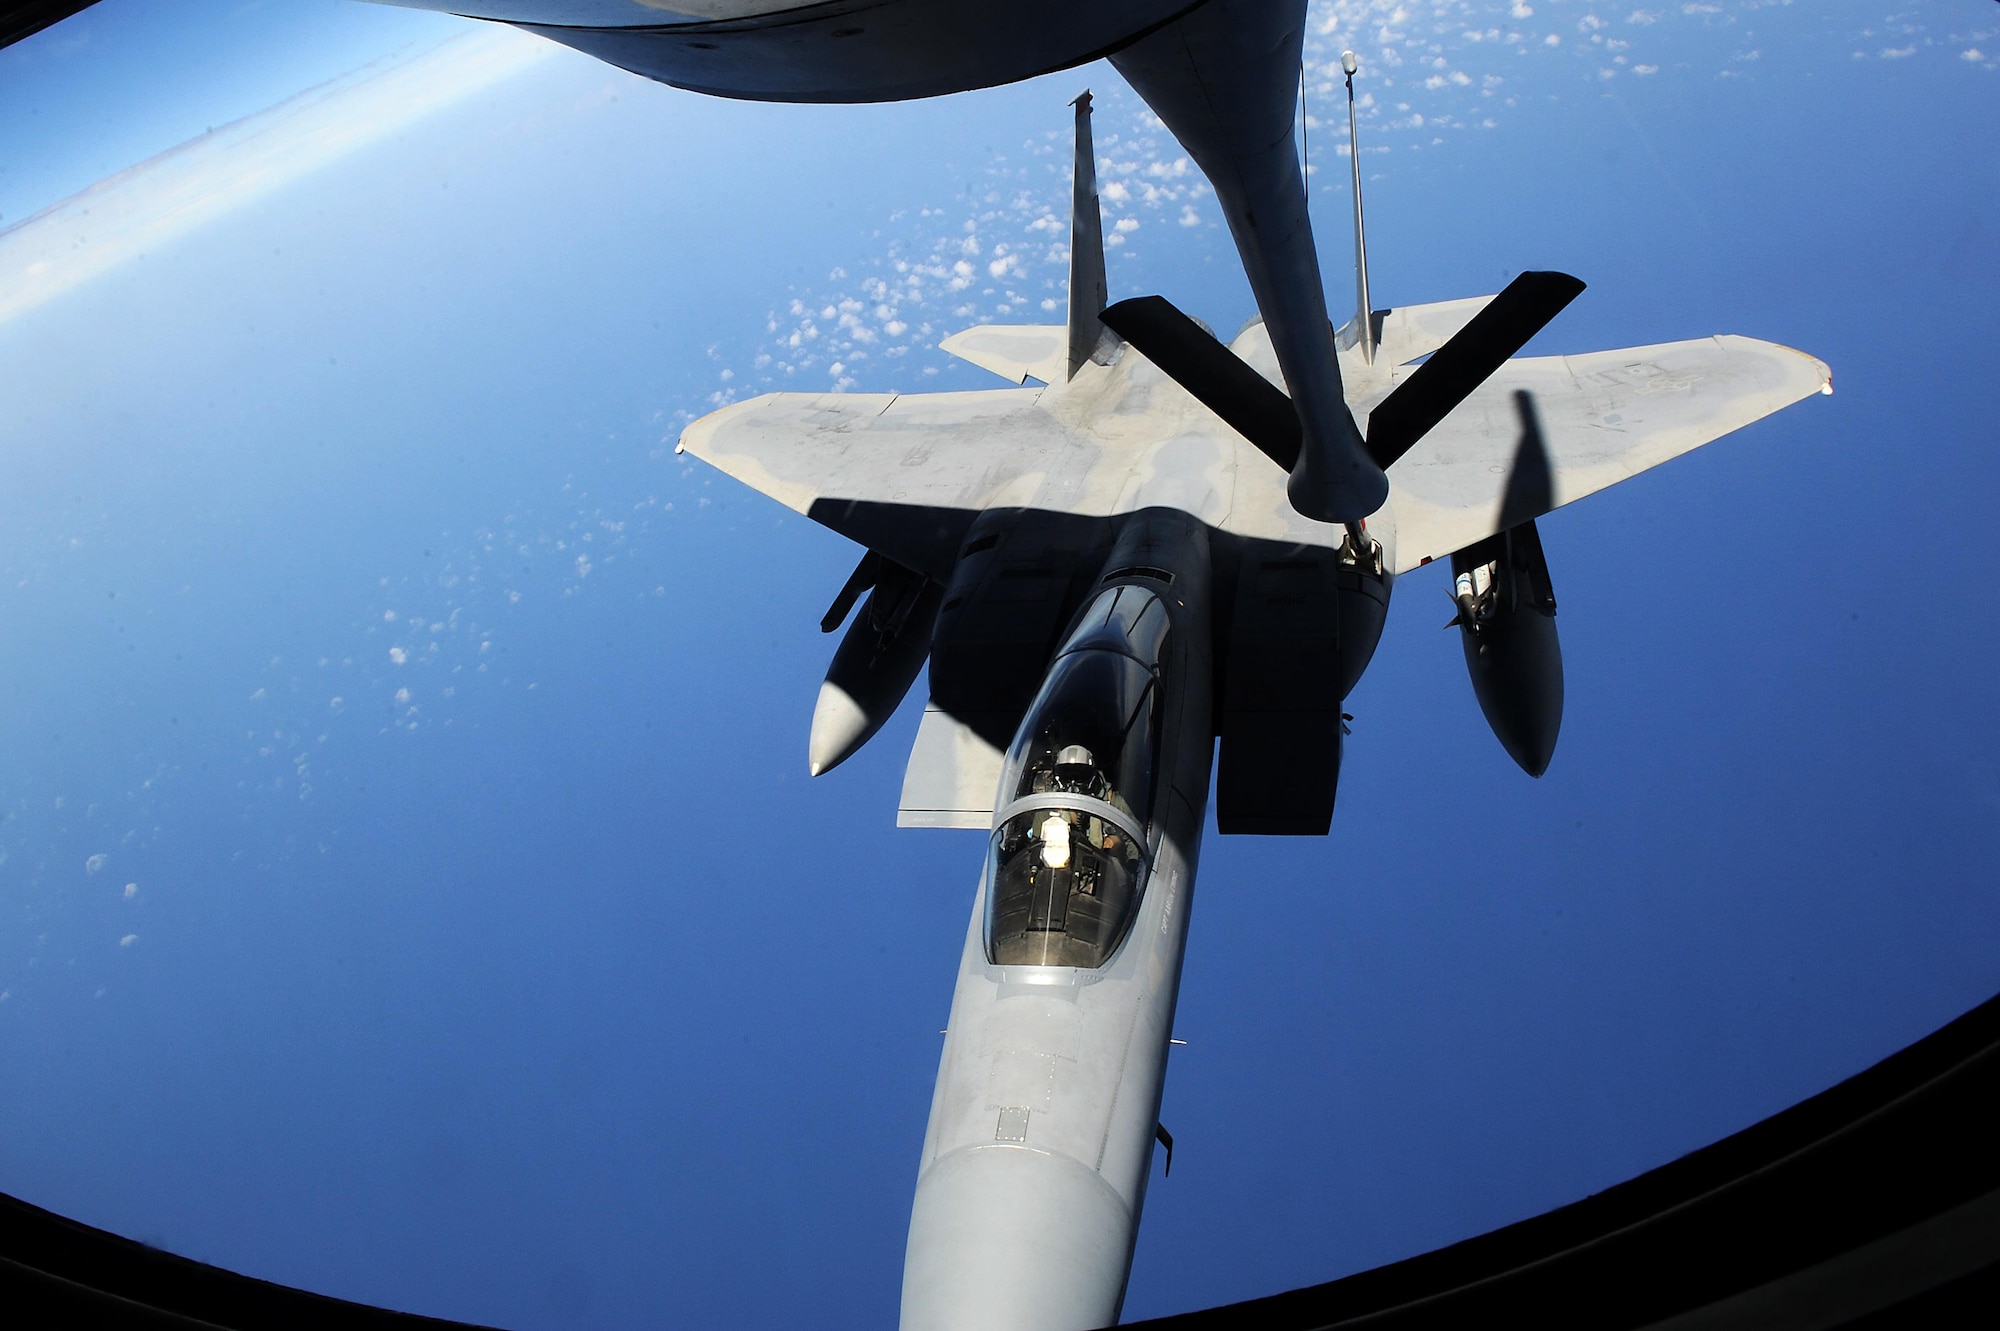 An F-15C Eagle from Kadena Air Base, Japan, receives fuel from a KC-135 Stratotanker during the Forceful Tiger exercise over the Pacific Ocean April 1, 2015. During the exercise, the Stratotankers provided about 800,000 pounds of fuel to 50 aircraft, enabling them to stay airborne for more than four hours. (U.S. Air Force photo /Airman 1st Class Zade C. Vadnais)